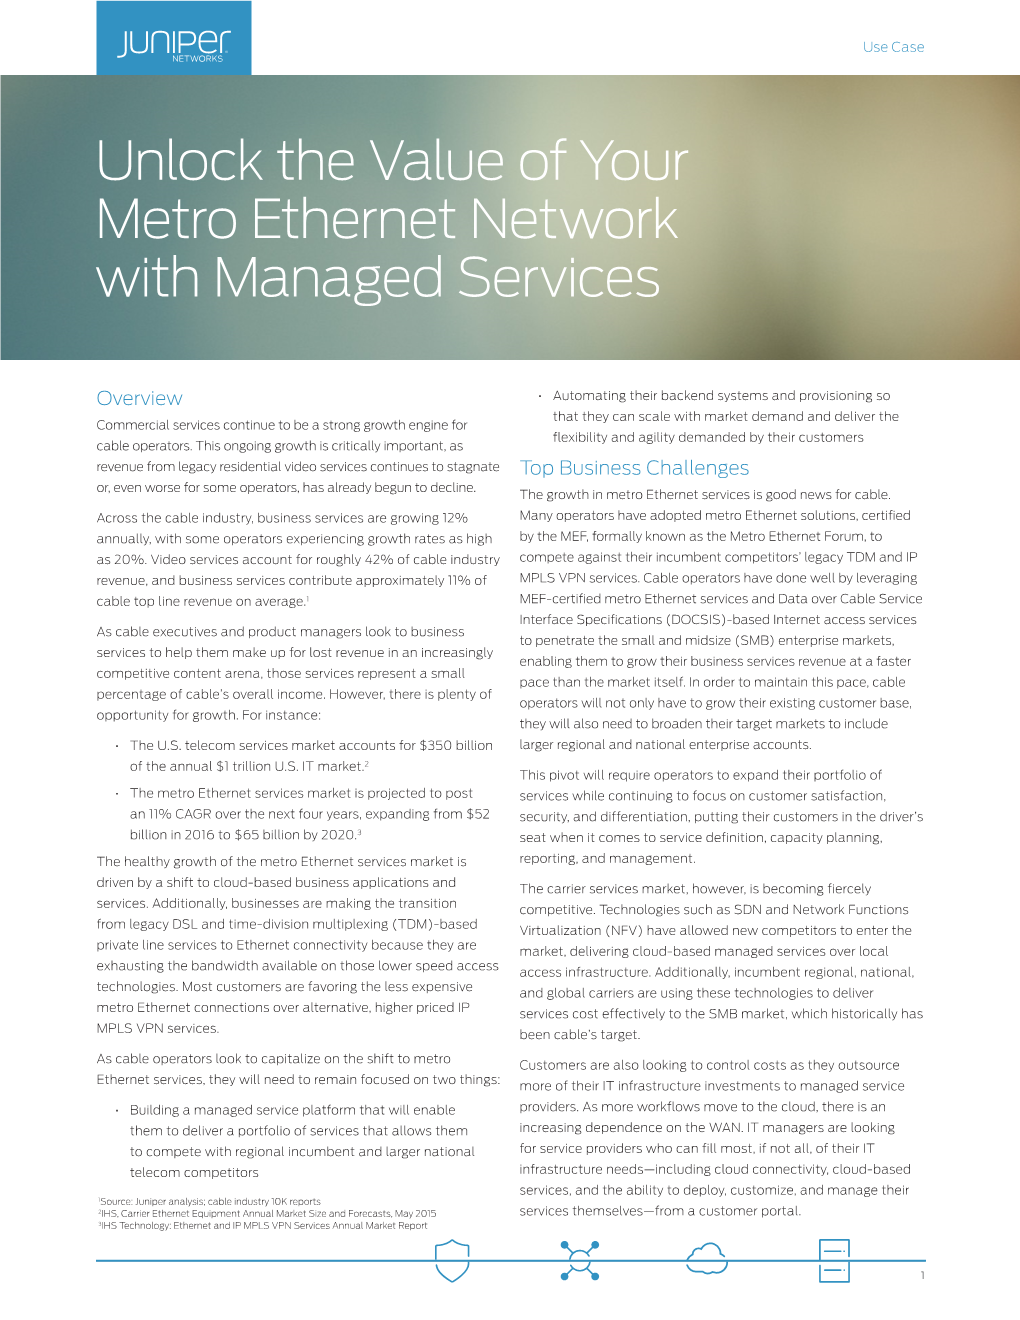 Metro Ethernet Network with Managed Services